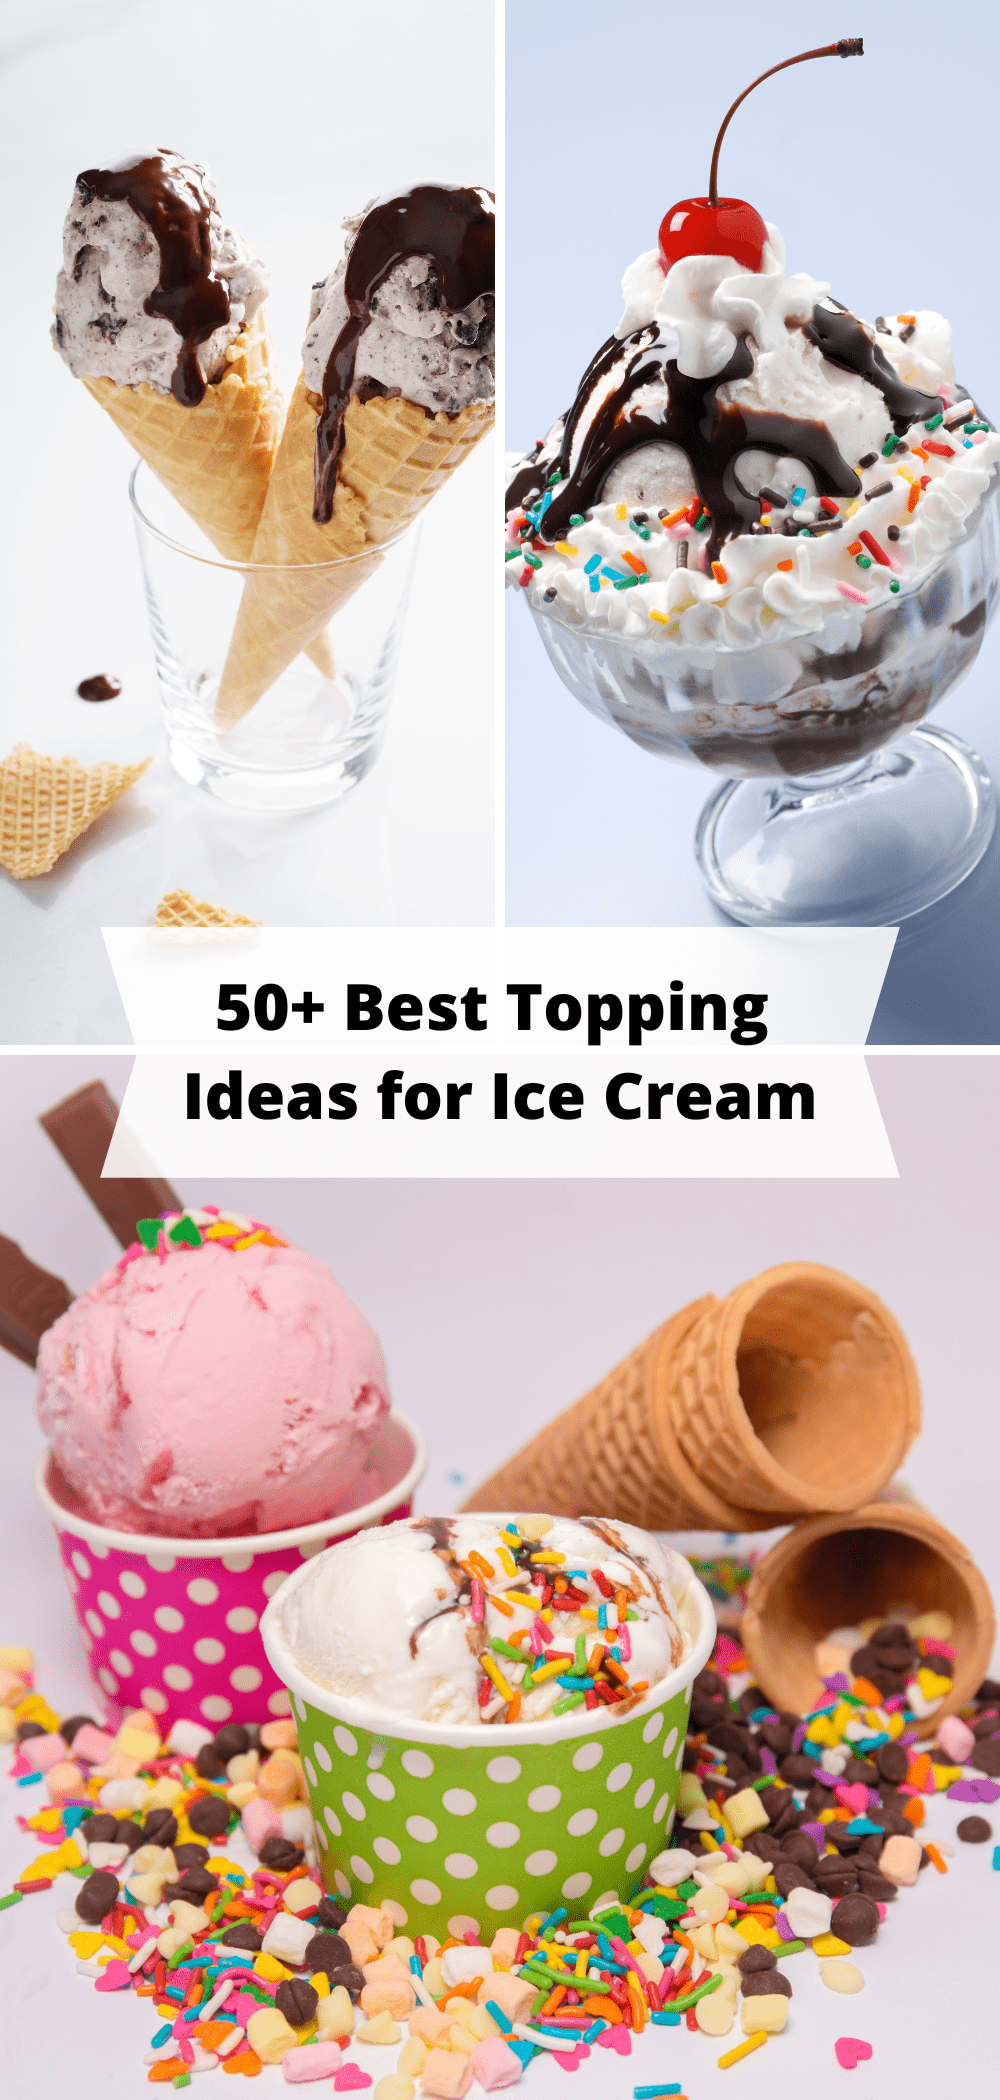 Images of different bowls and cones of ice cream with many toppings.